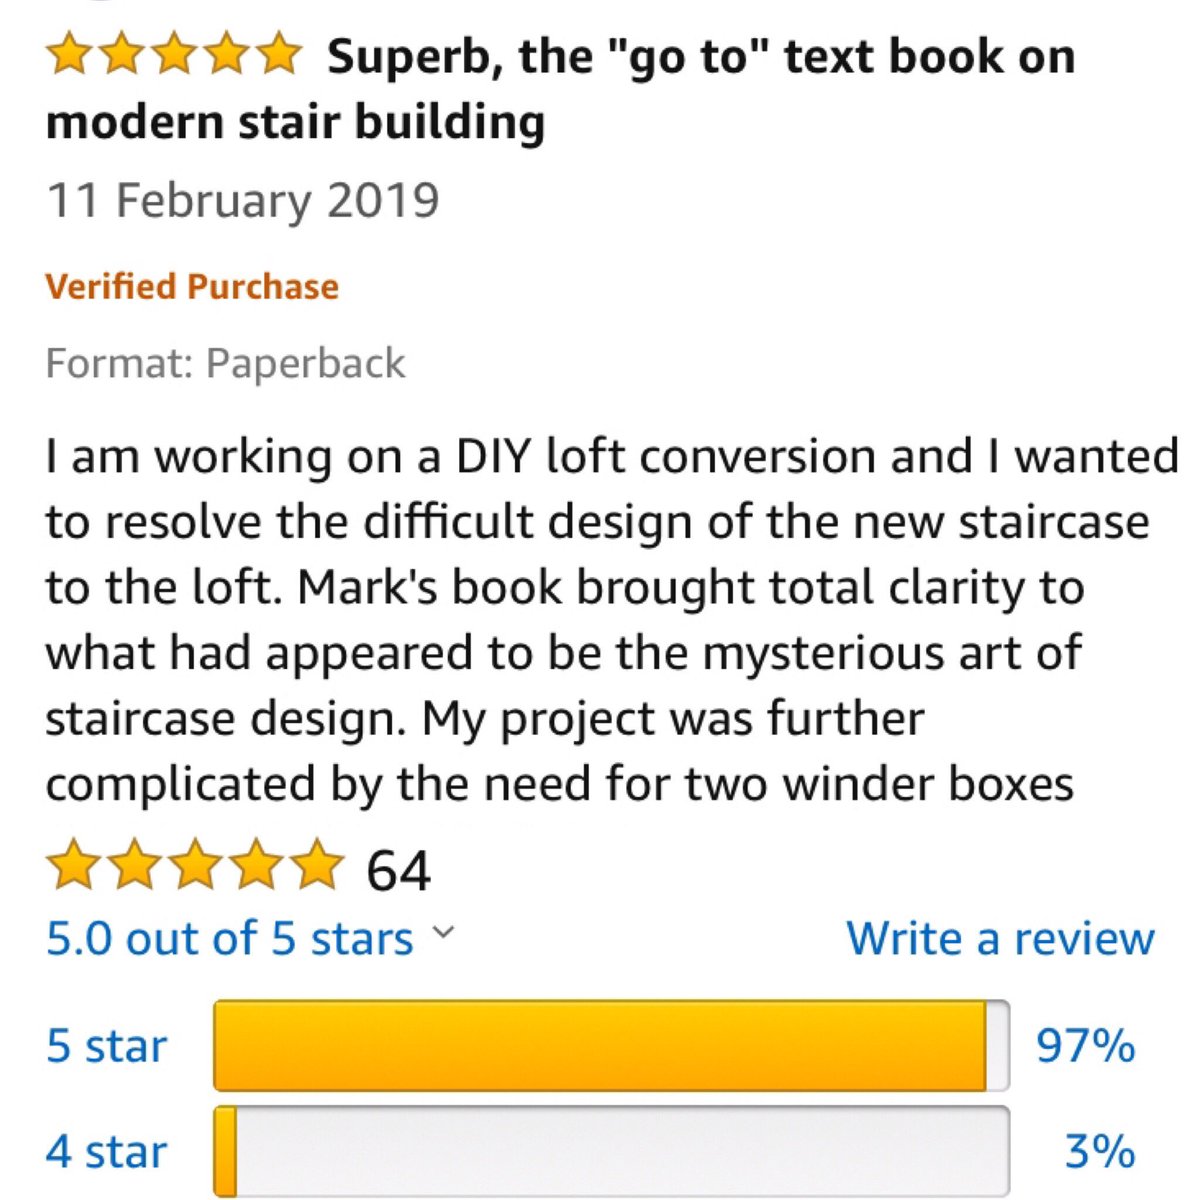 Love sorting by ‘Average Customer Review’! And here’s why...
.
#simplystairs #stairs #staircases #stairporn #railings #handrail #treads #woodjoints #woodwork #woodworking #carpentry #joinery #design #build #handmade #handskills #handtools #timber #wood amazon.co.uk/gp/aw/reviews/…